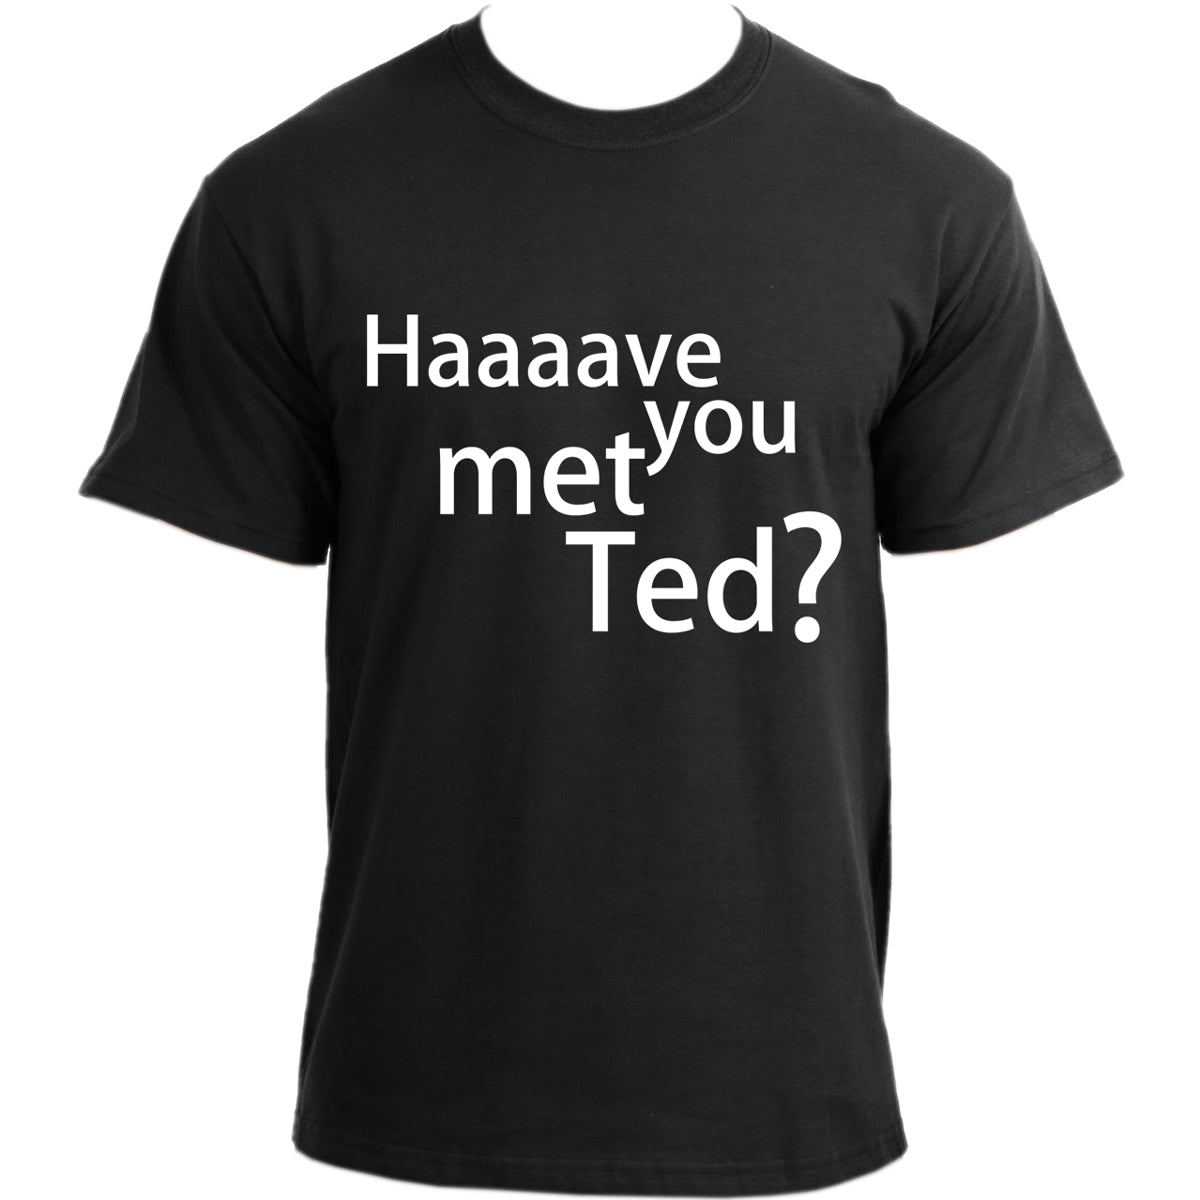 himym - Have you met Ted? TV Series Barney Stinson Inspired Funny T-shirt